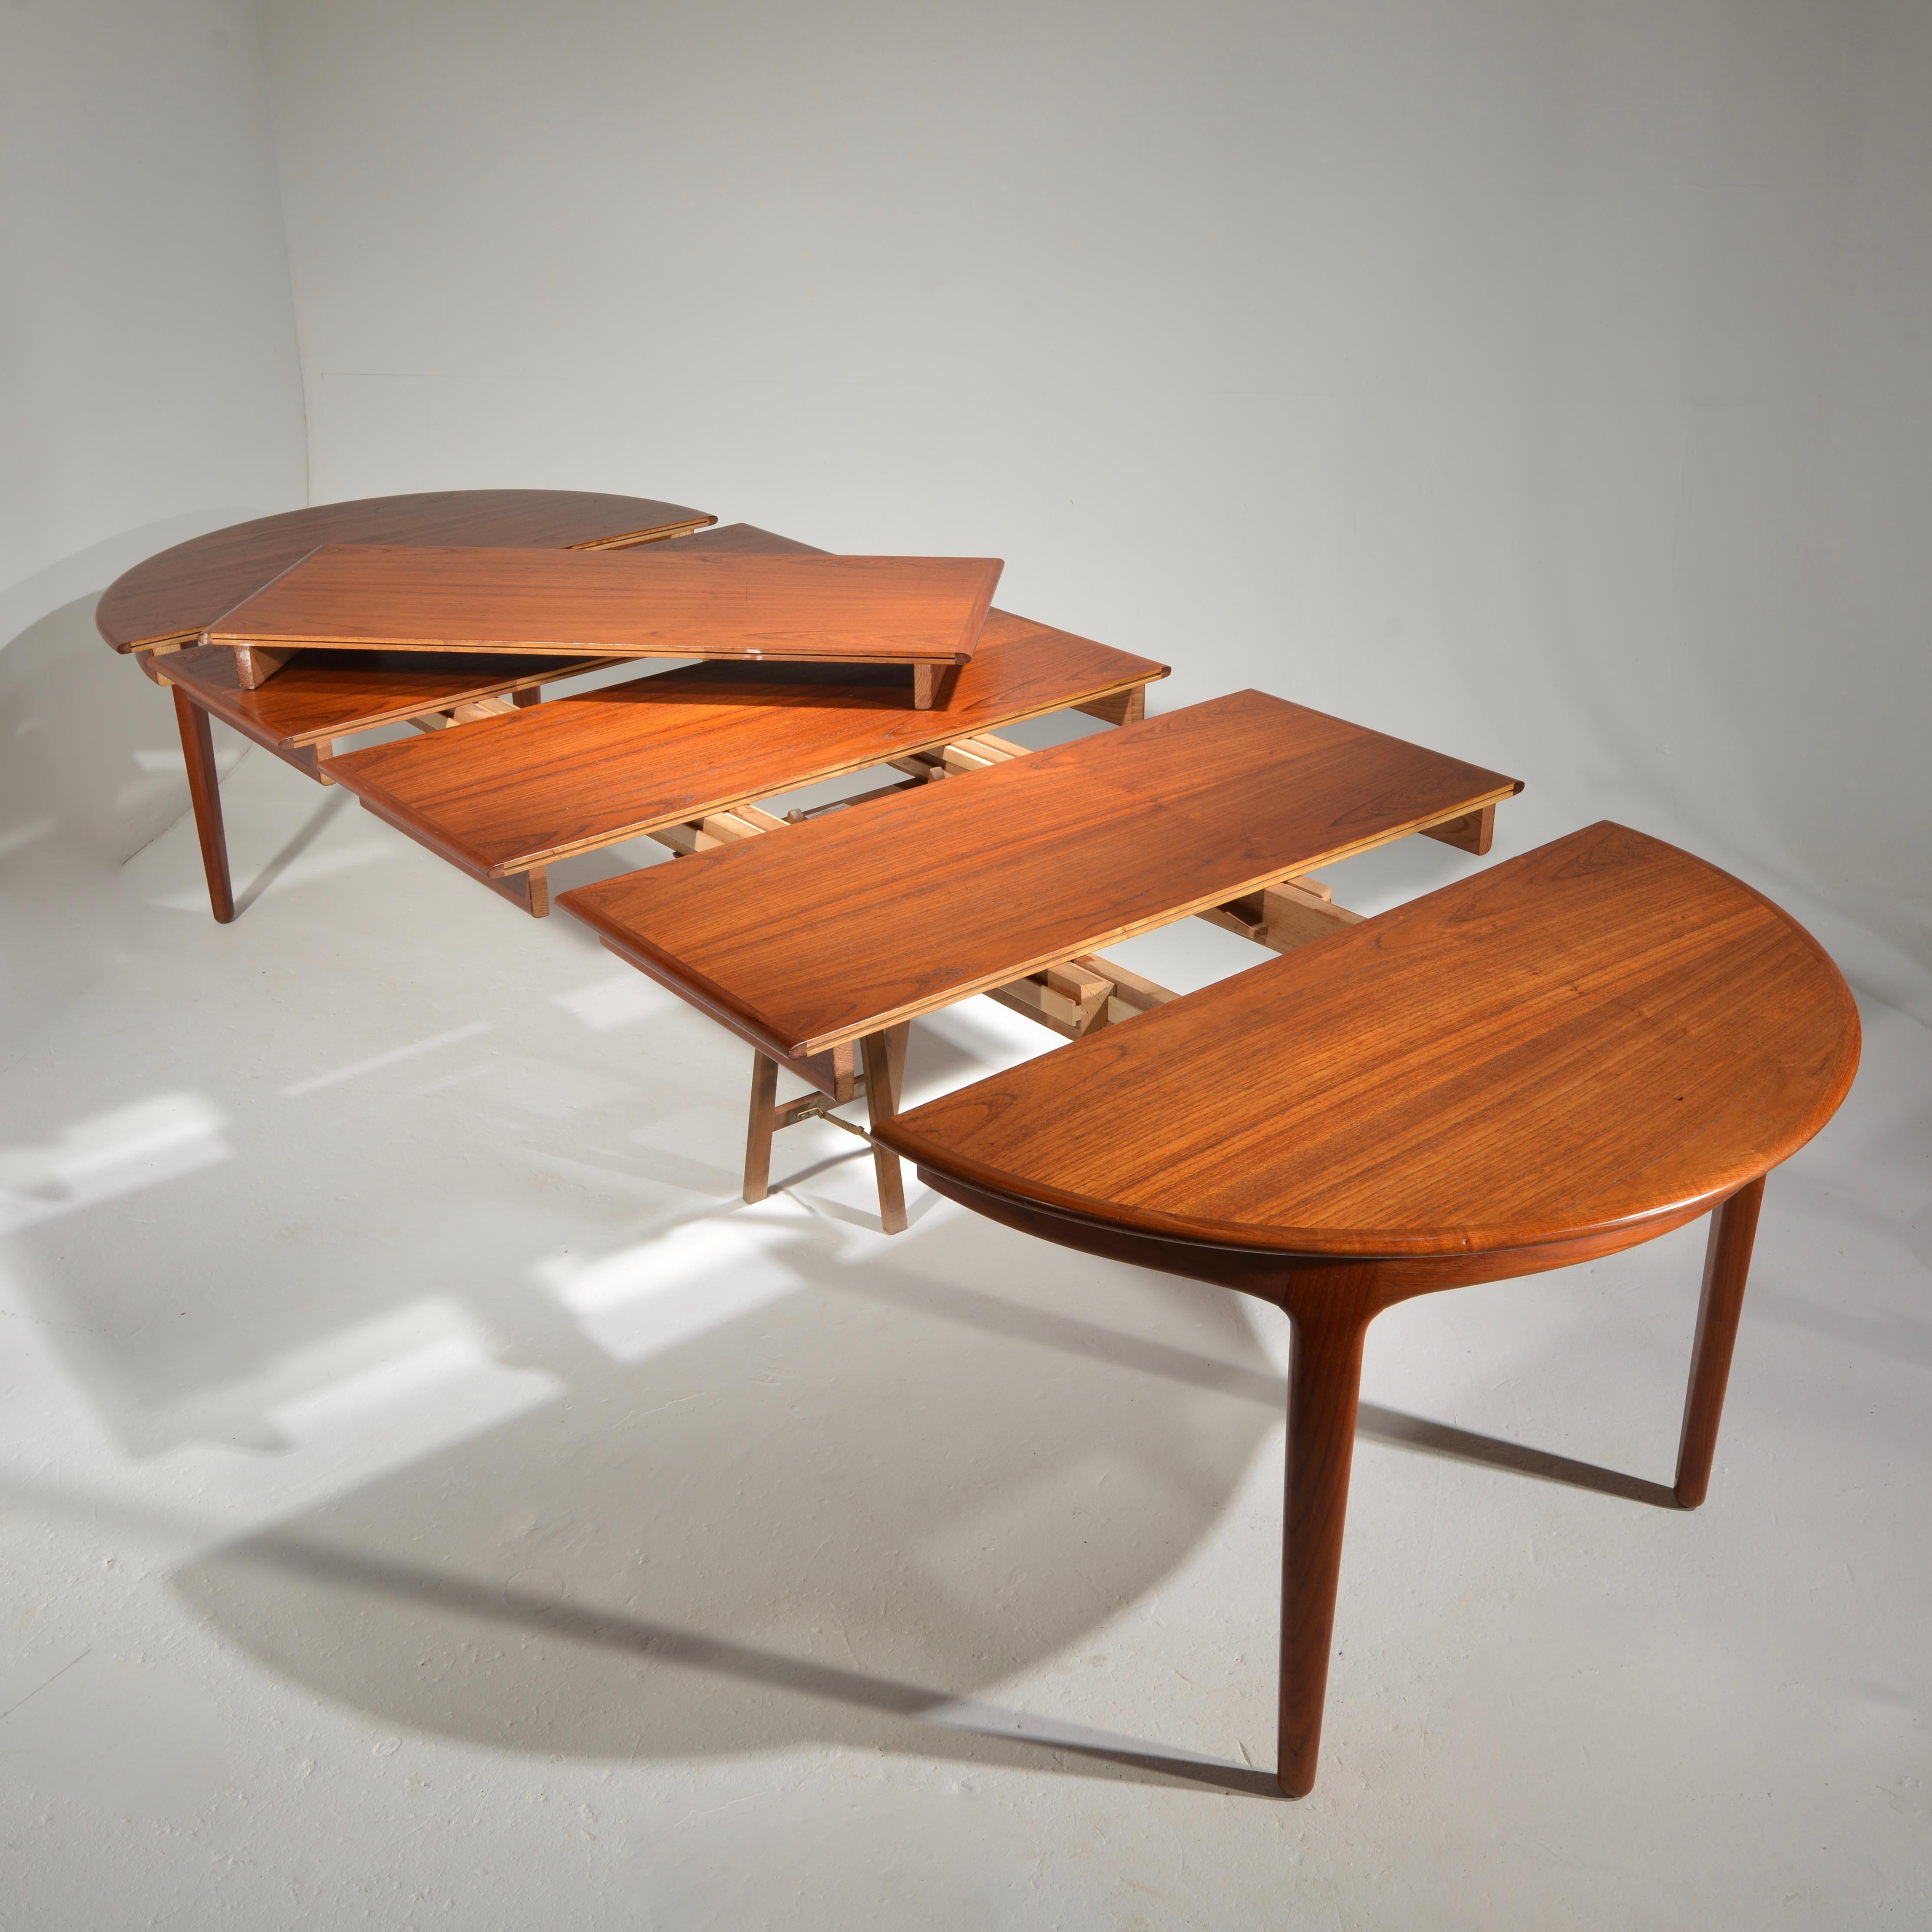 Mid-20th Century Extra Long Danish Teak Round Table with 4 Extensions by Henning Kjaernulf